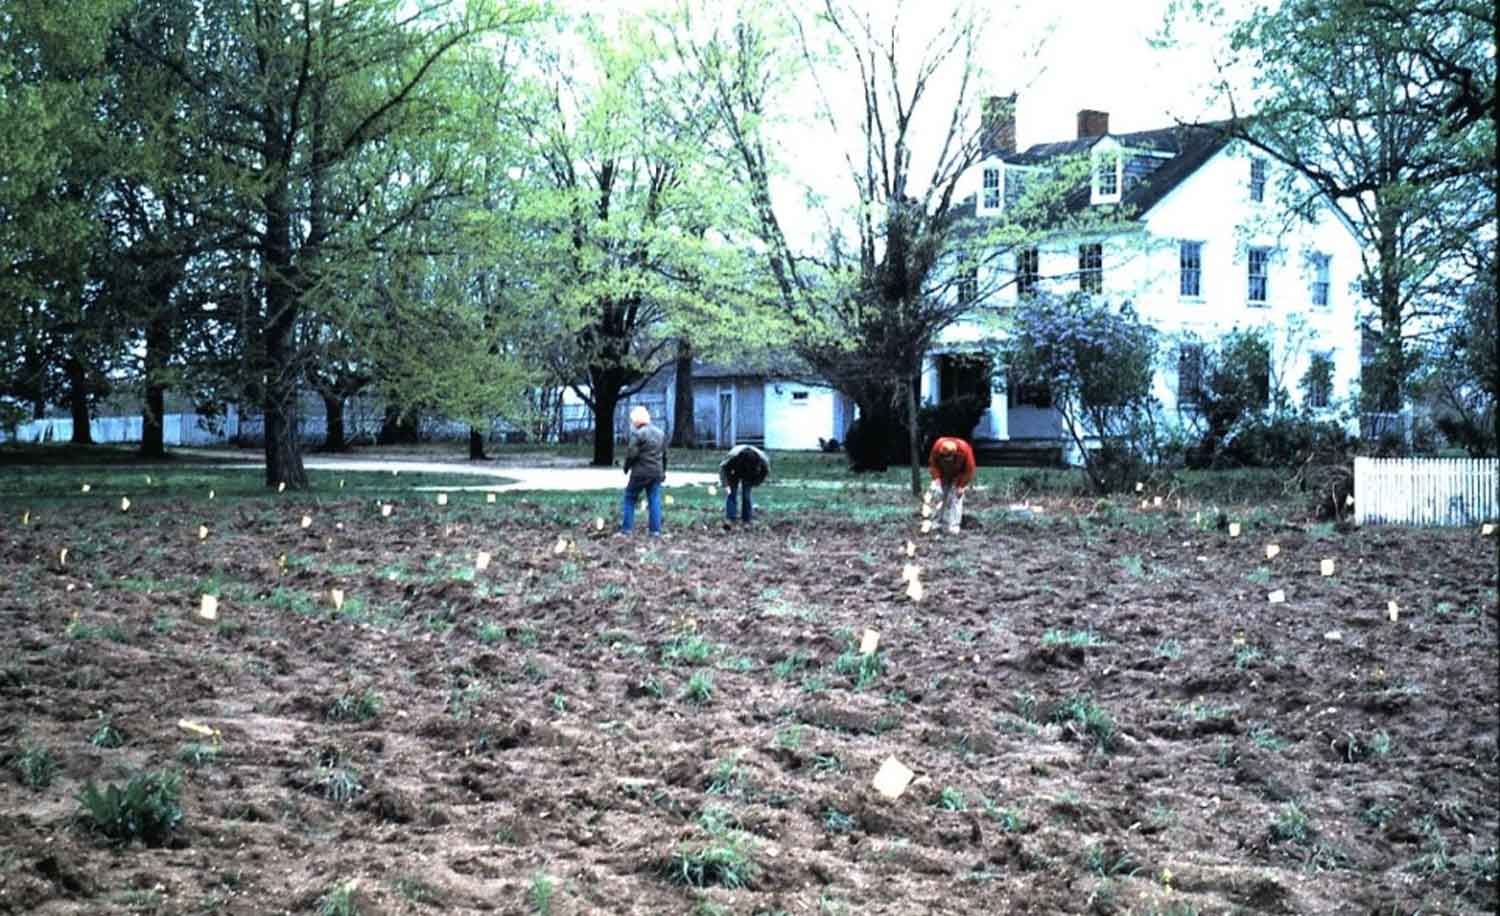 Archaeological surface collection around the 1840s Brome Plantation House that gave the first clues as to where the center of St. Mary’s City might have been